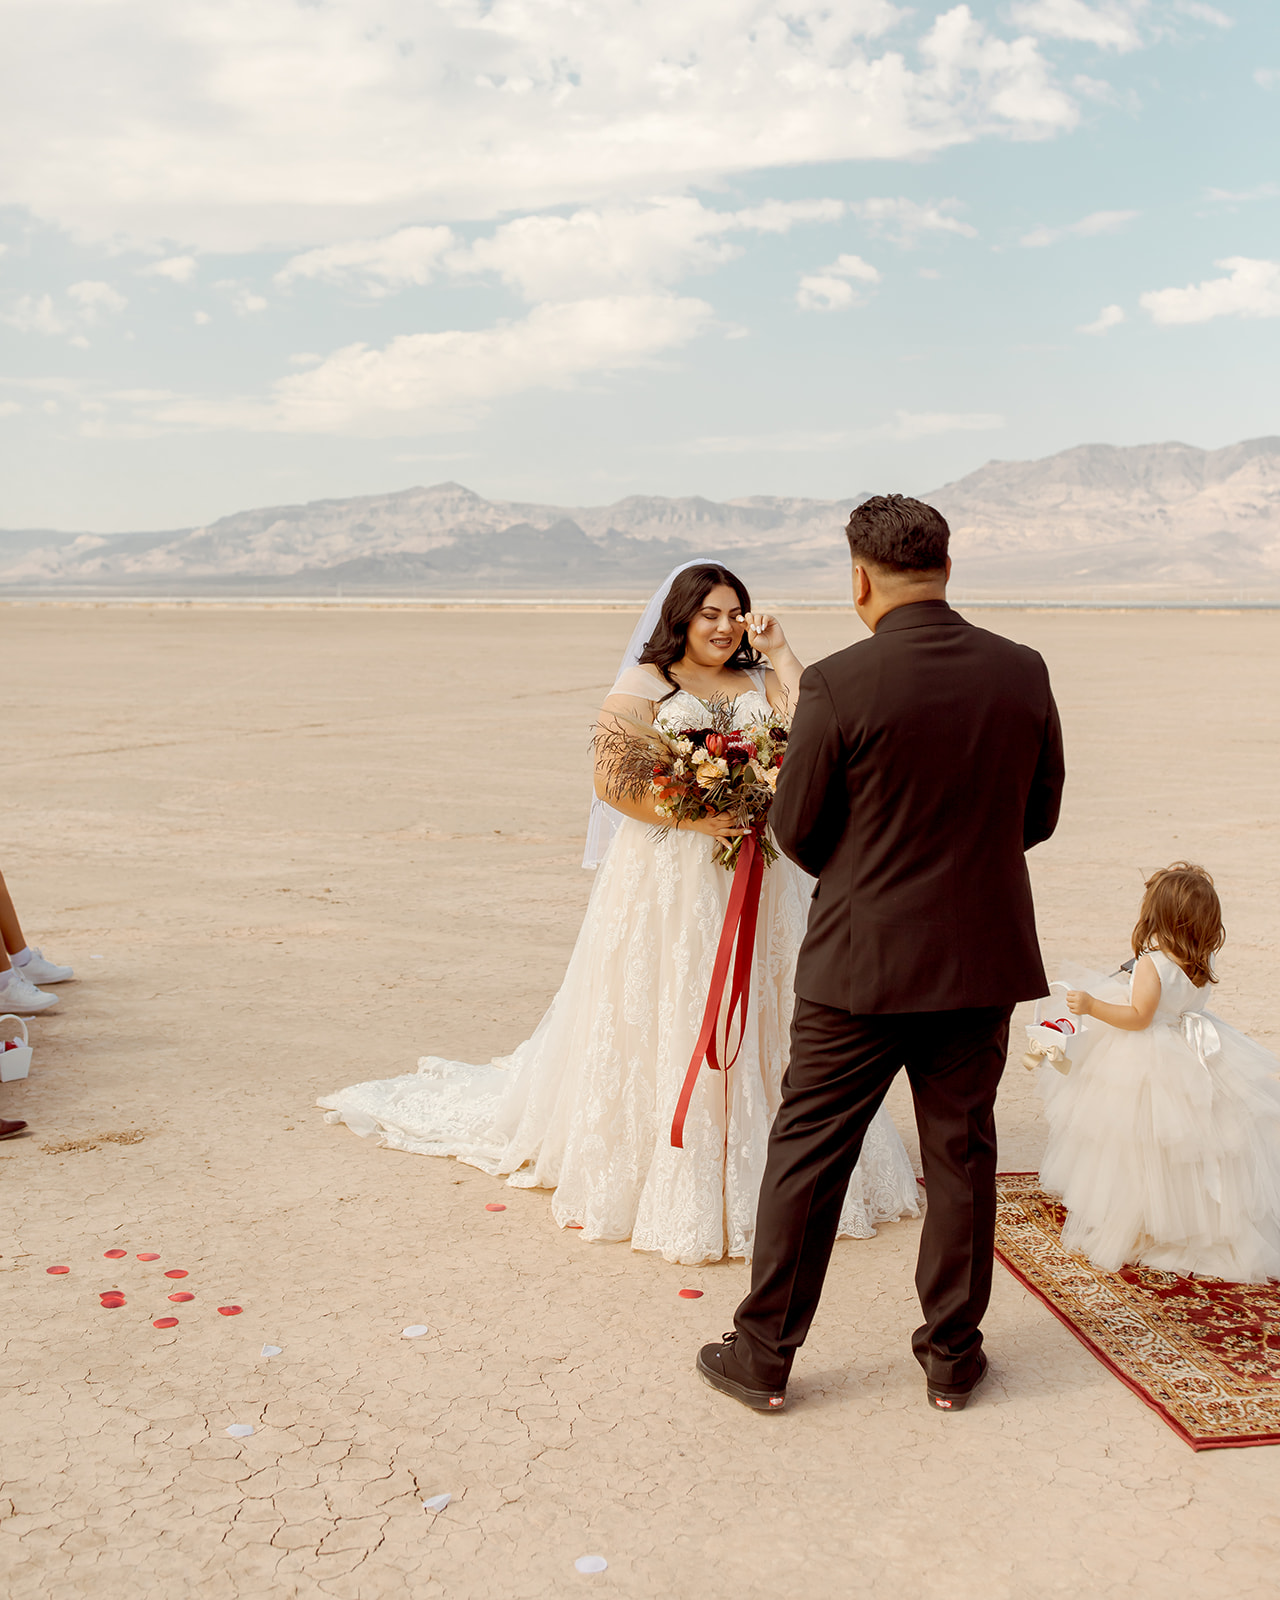 Bride Tearing up at Altar in Moody Dry Lake Bed Elopement 